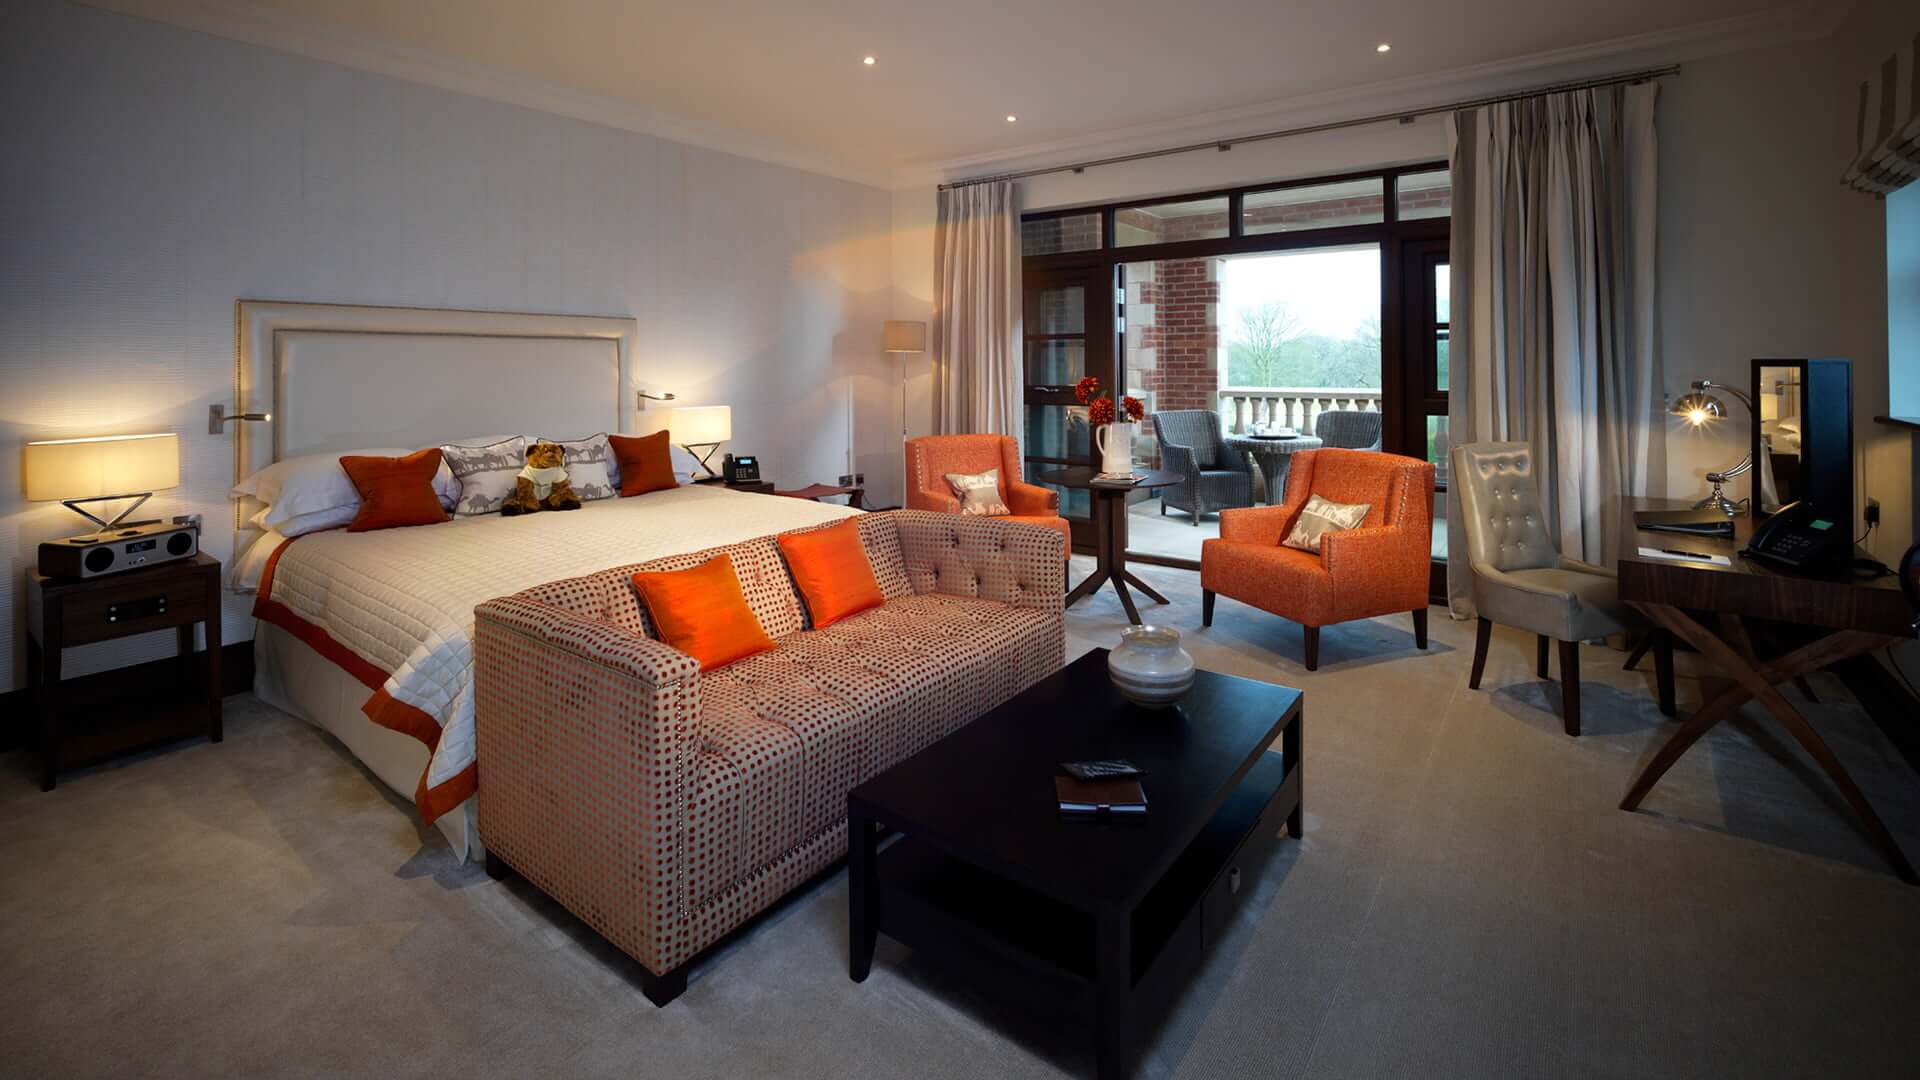 Our Junior Suite at Northcote 